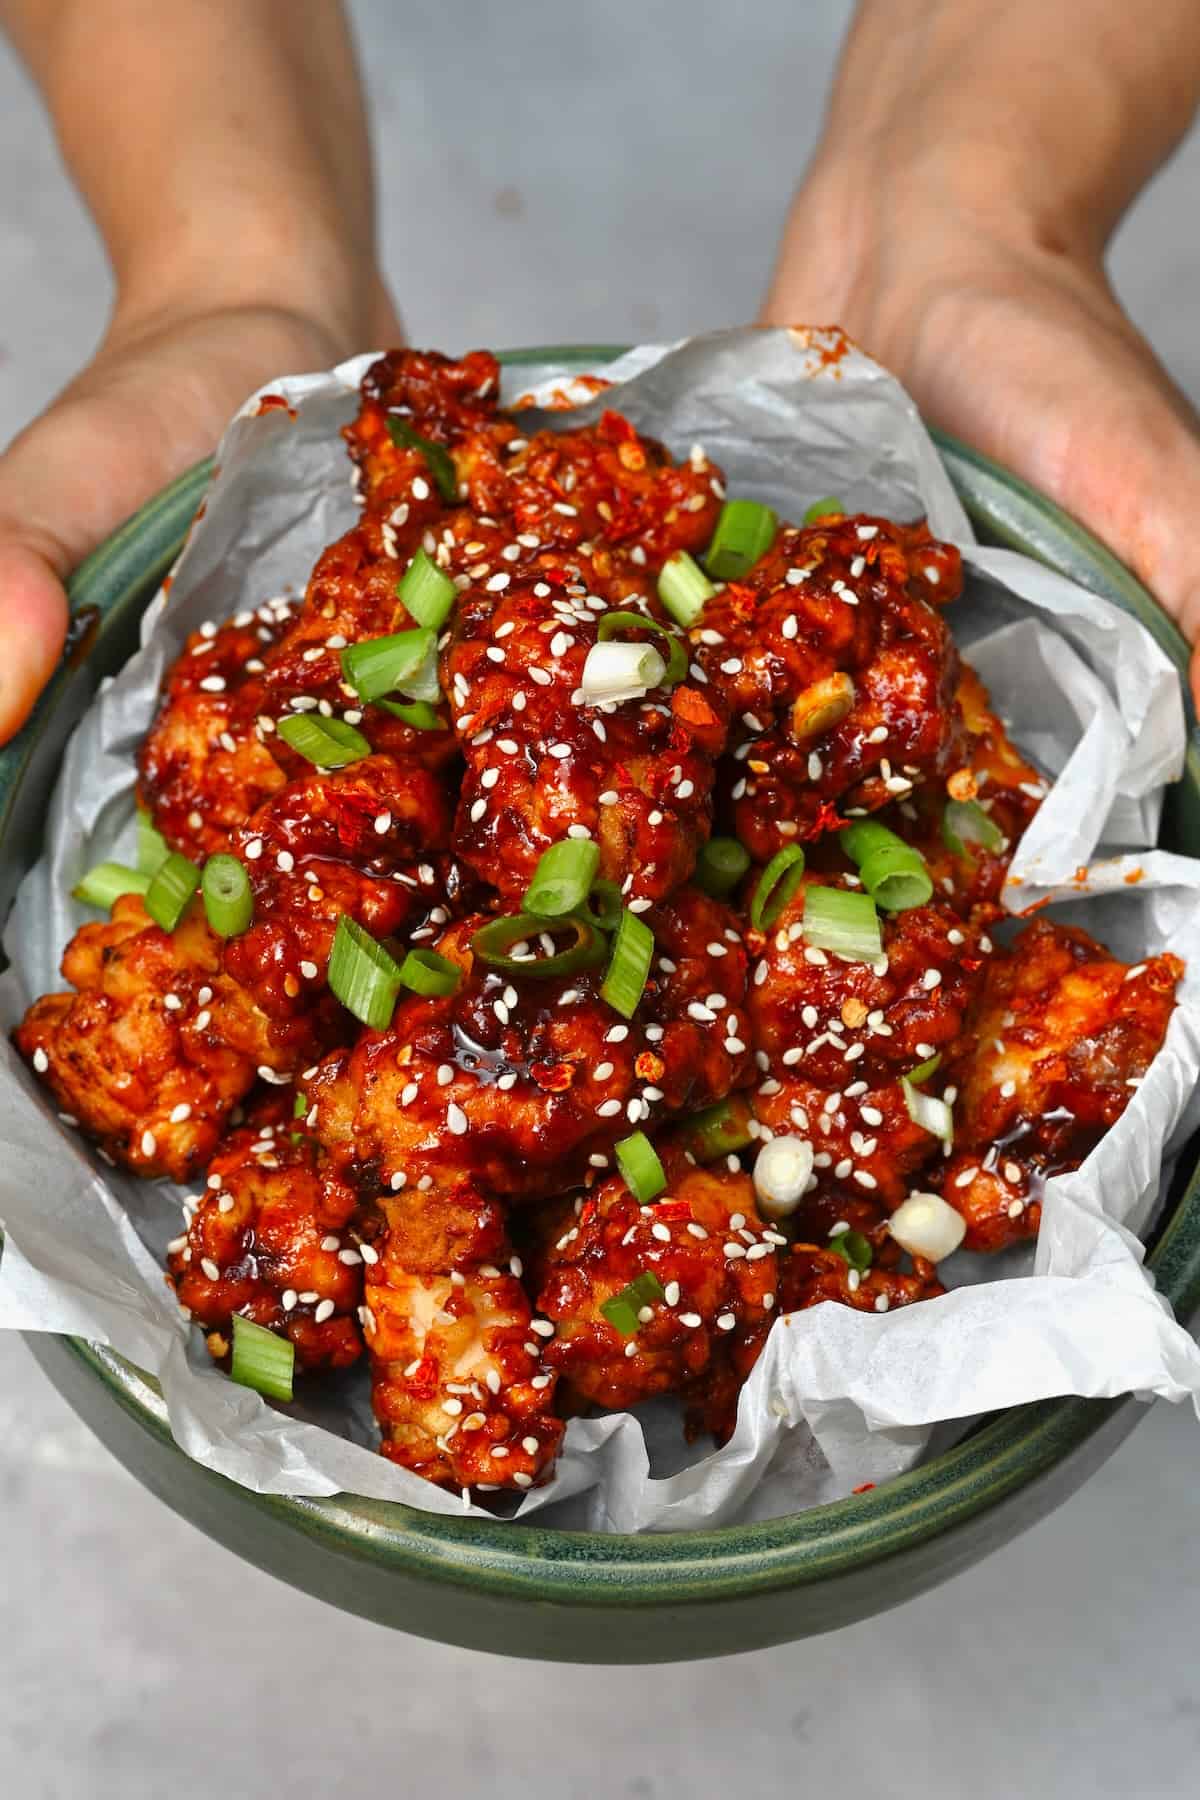 Korean Fried Chicken Spicy - Products